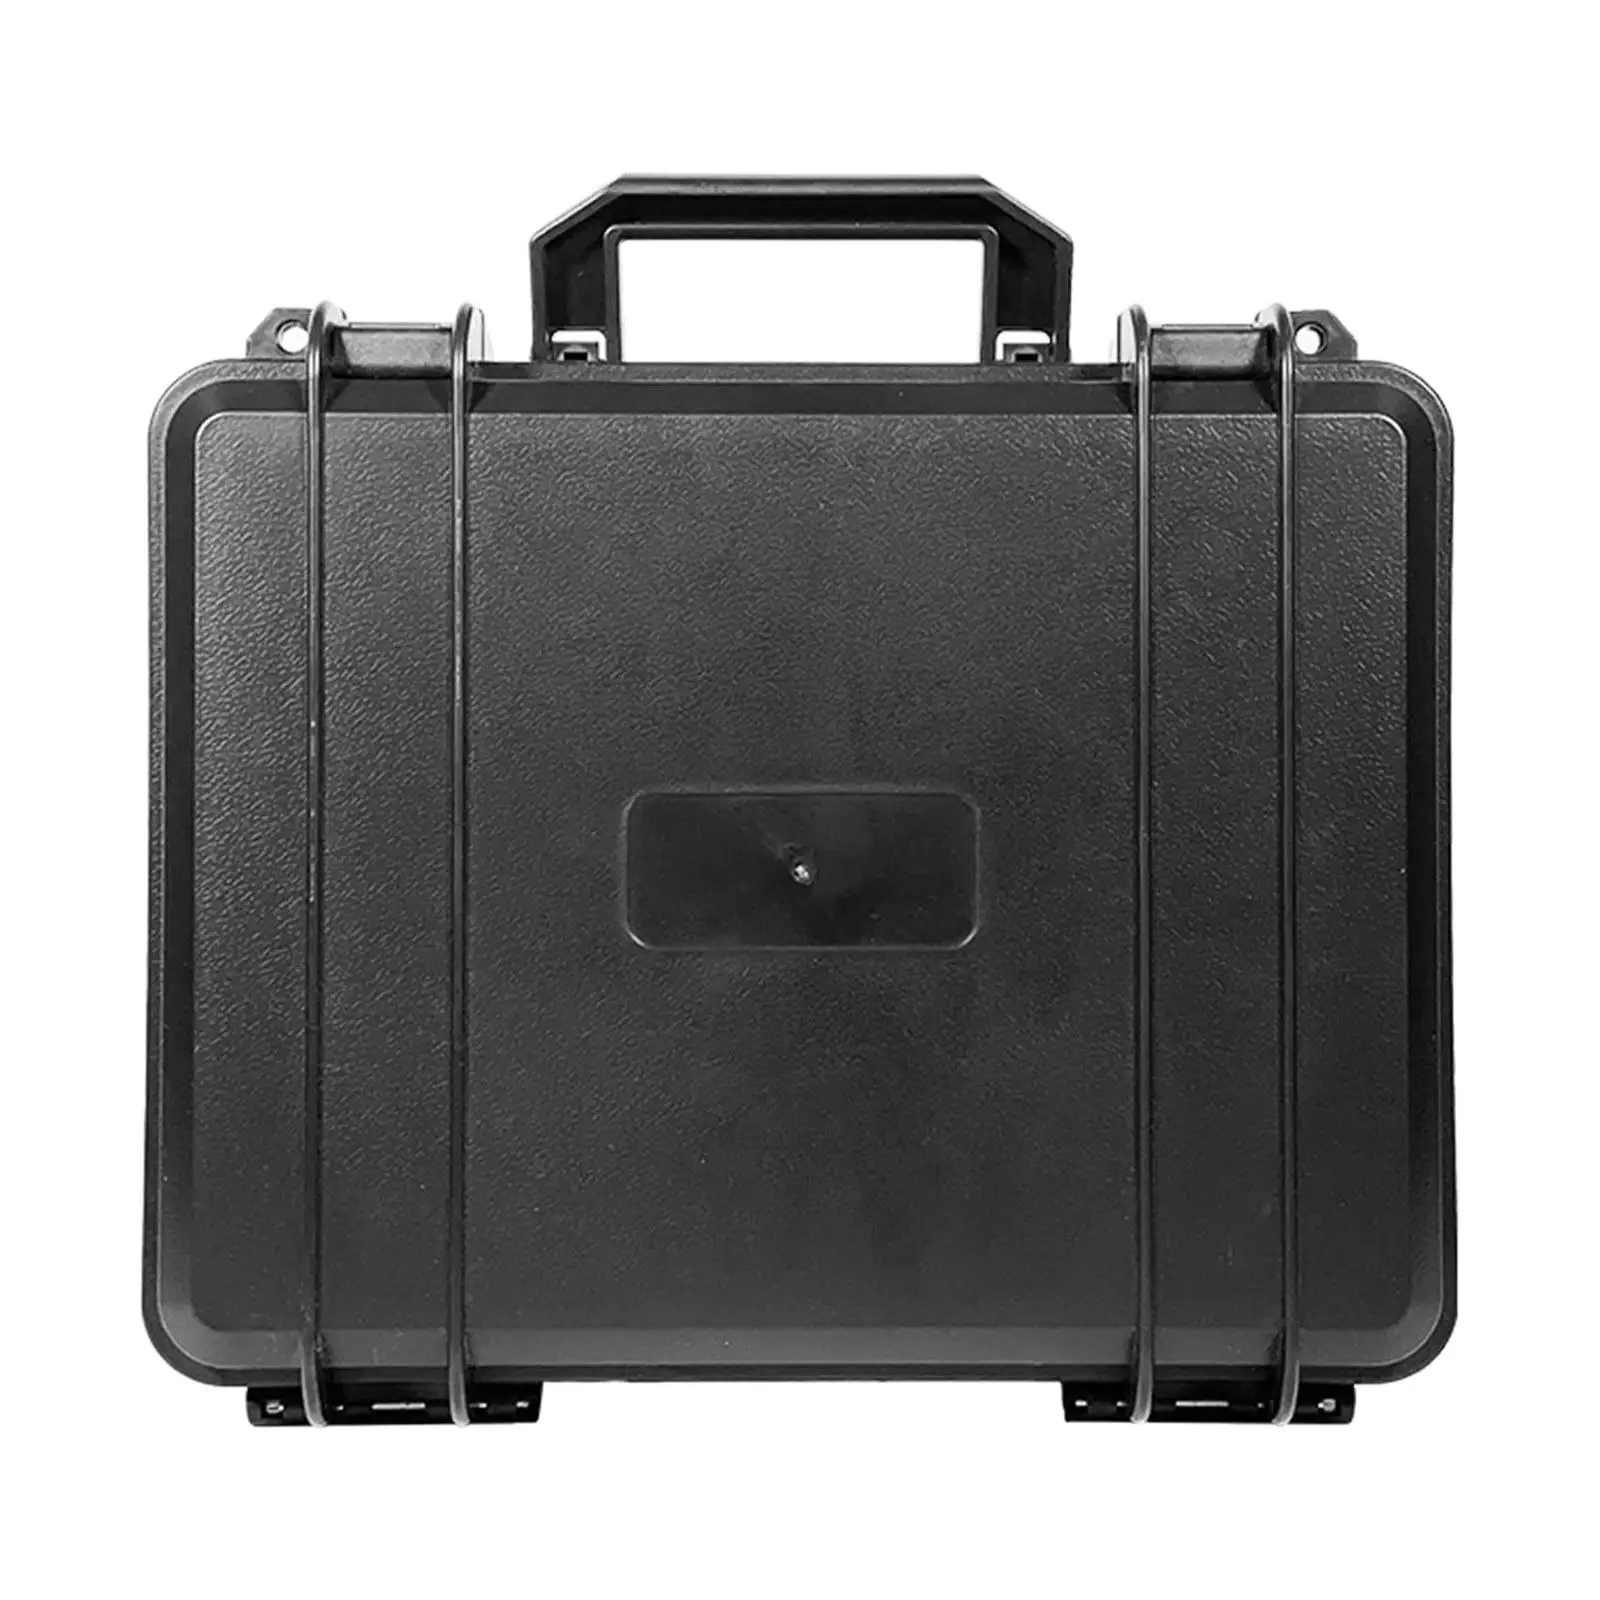 Universal Protective Toolbox Storage Box Wear Resistant Durable Equipment Lockable Suitcase Hardware for Outdoor Workplace